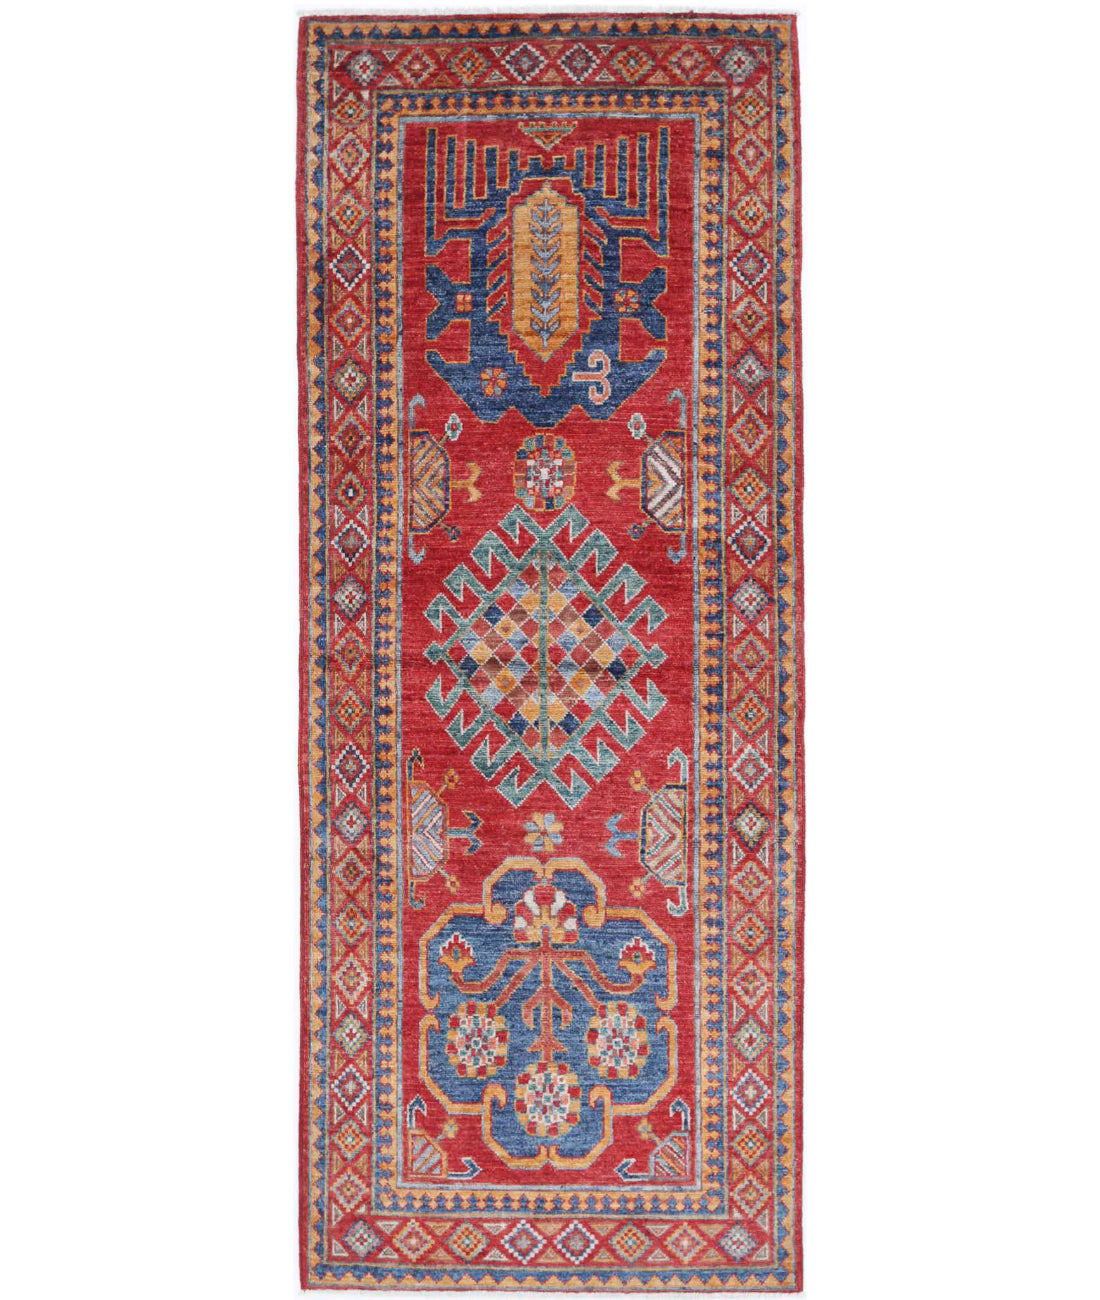 Hand Knotted Nomadic Caucasian Humna Wool Rug - 2&#39;10&#39;&#39; x 7&#39;5&#39;&#39; 2&#39;10&#39;&#39; x 7&#39;5&#39;&#39; (85 X 223) / Red / Gold